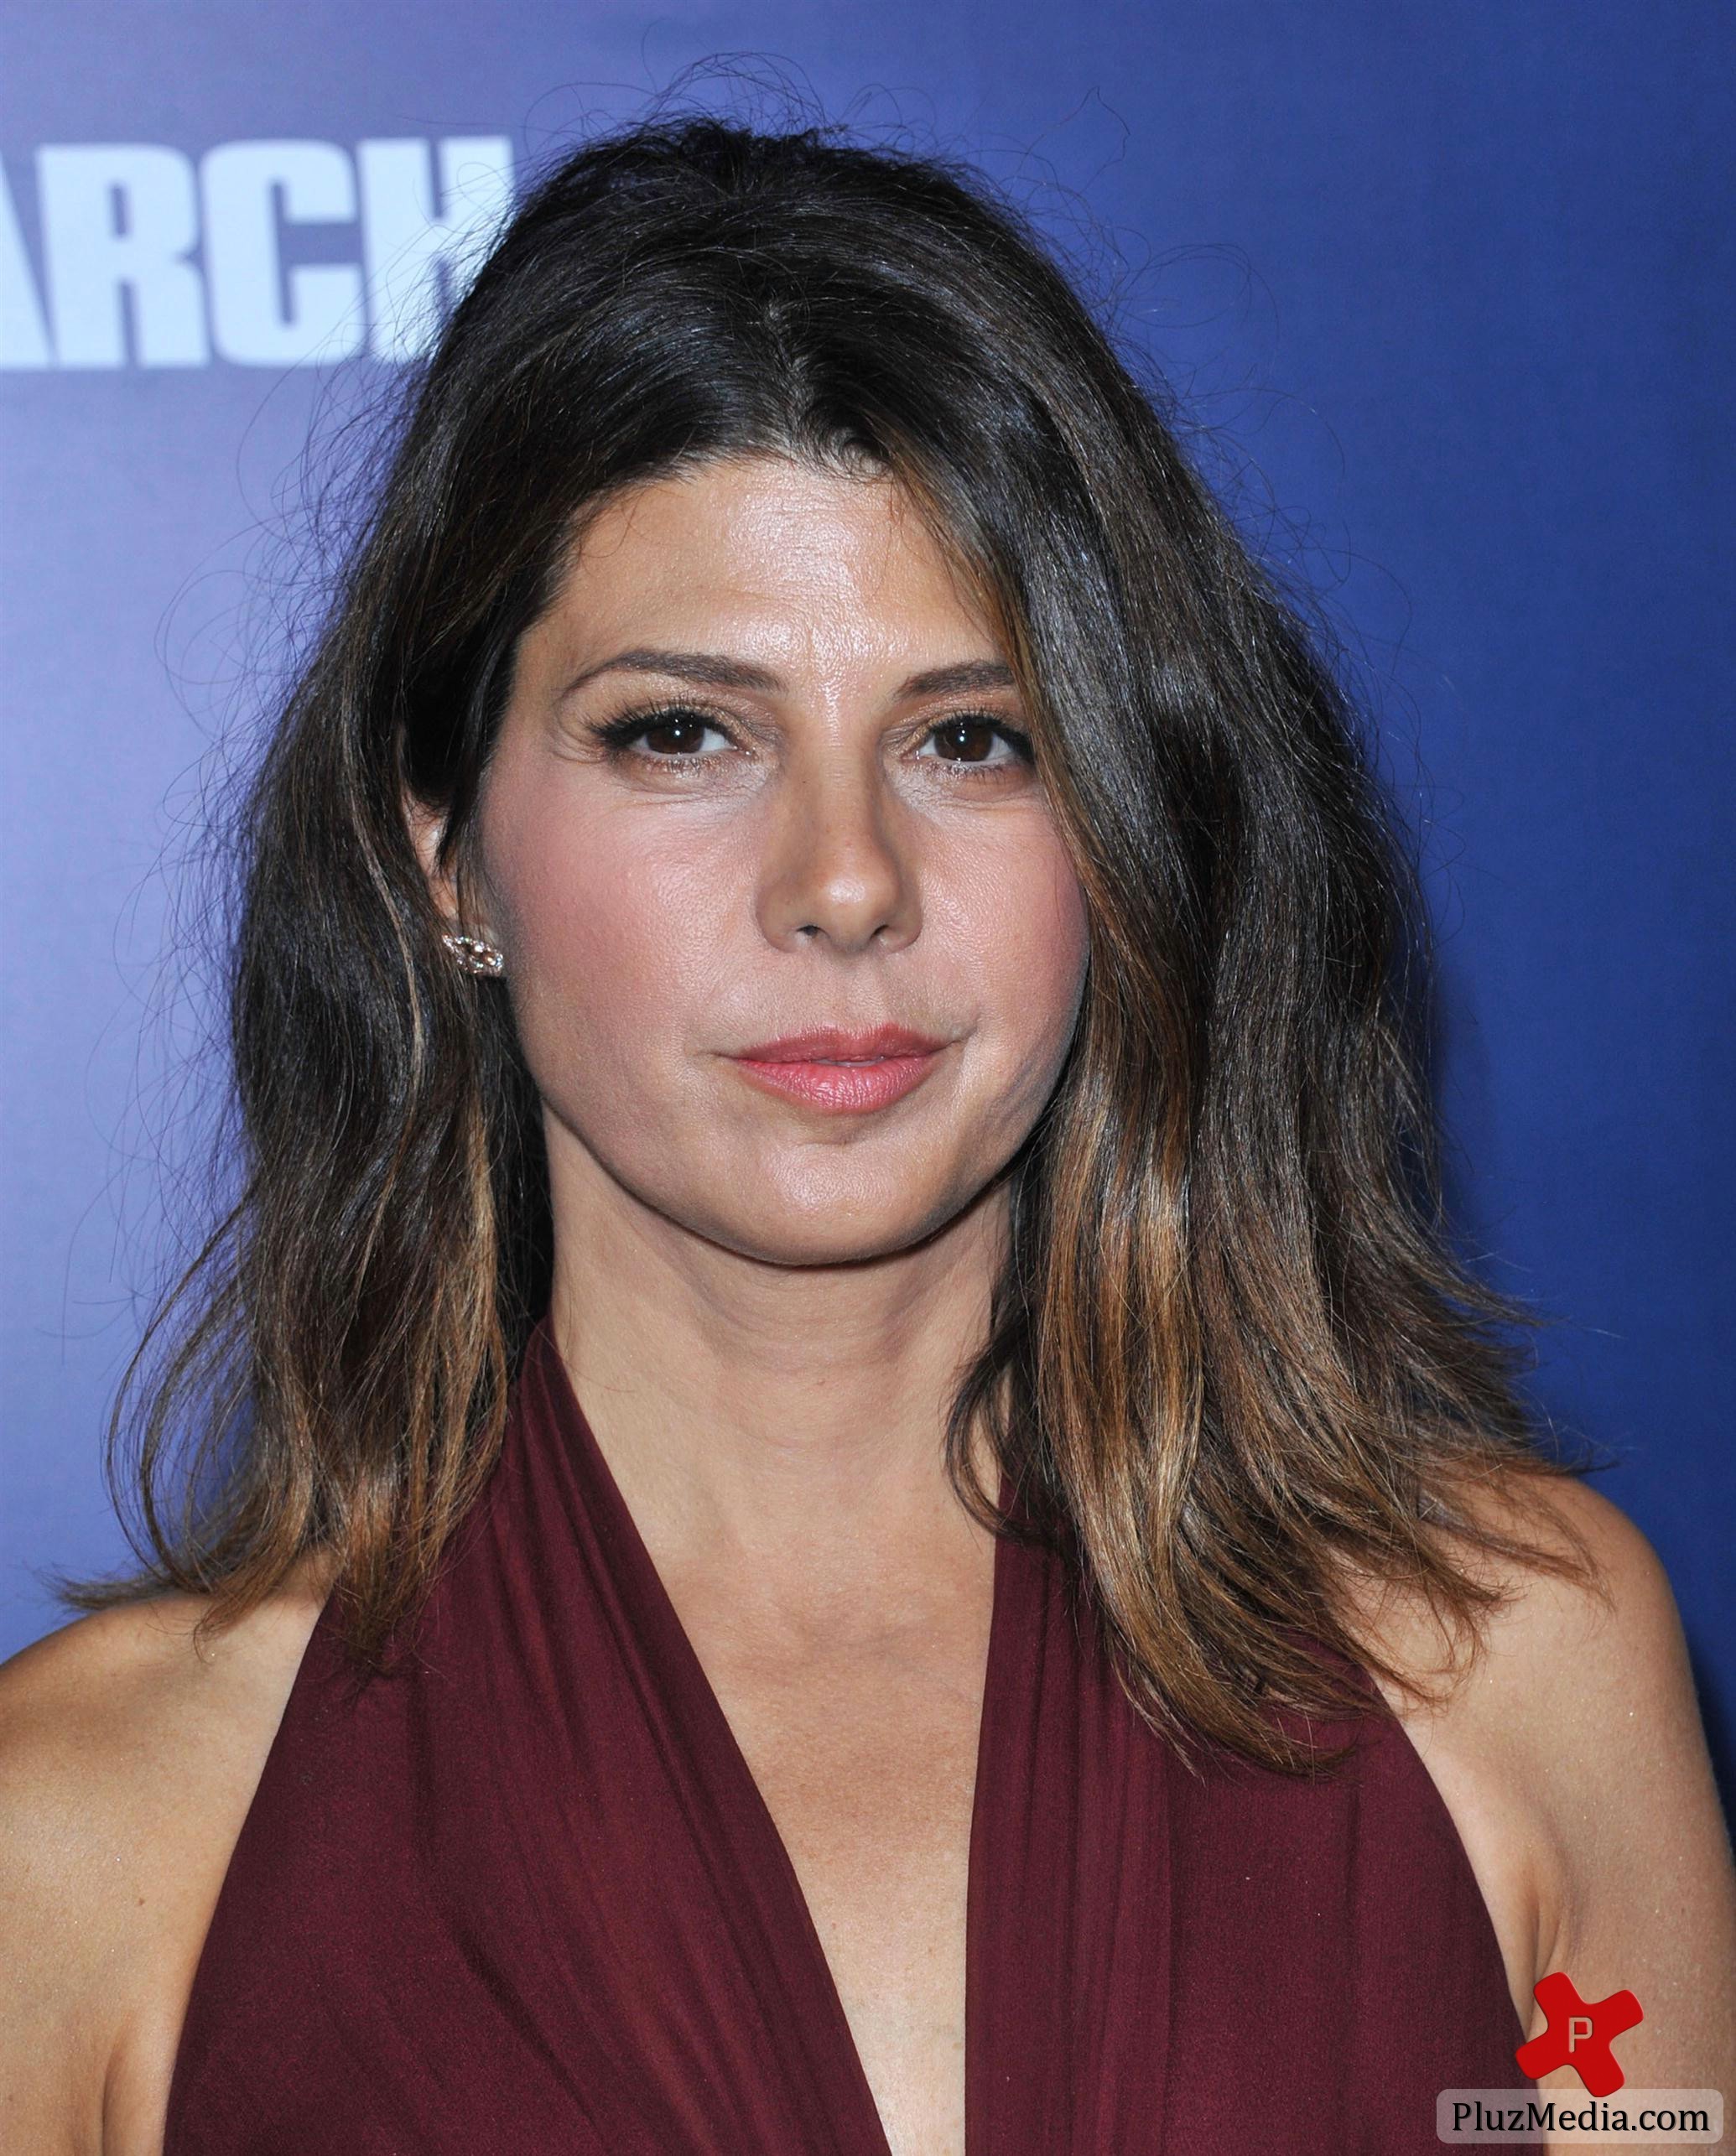 Marisa Tomei - Premiere of 'The Ides Of March' held at the Academy theatre - Arrivals | Picture 88641